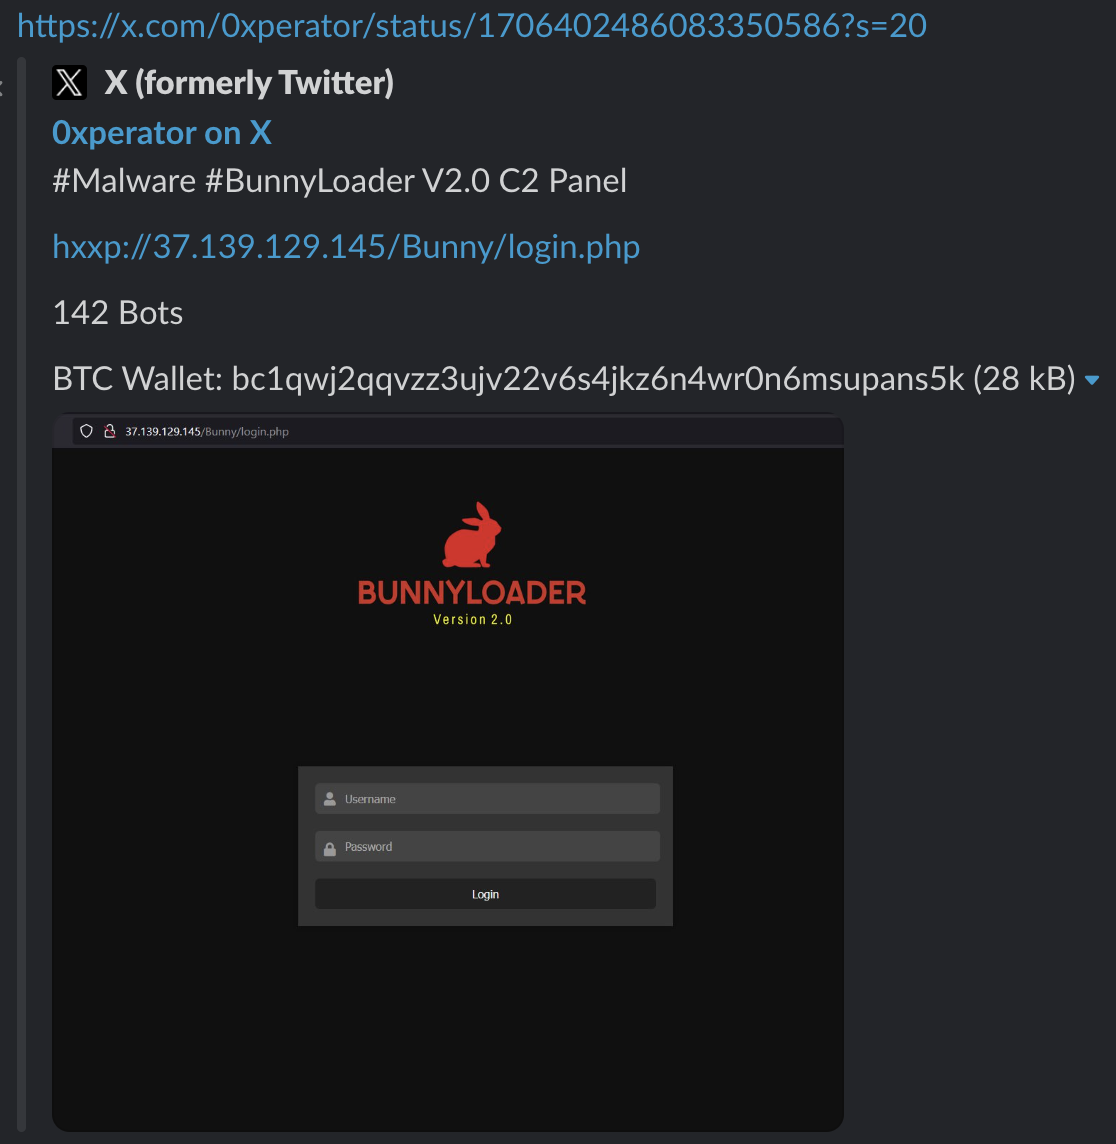 Image 2 is a screenshot of an X post. Hashtag Malware and BunnyLoader. Bunny login link. 142 bots. BTC wallet. Screenshot of BunnyLoader login page. Logo and Username and Password fields. 